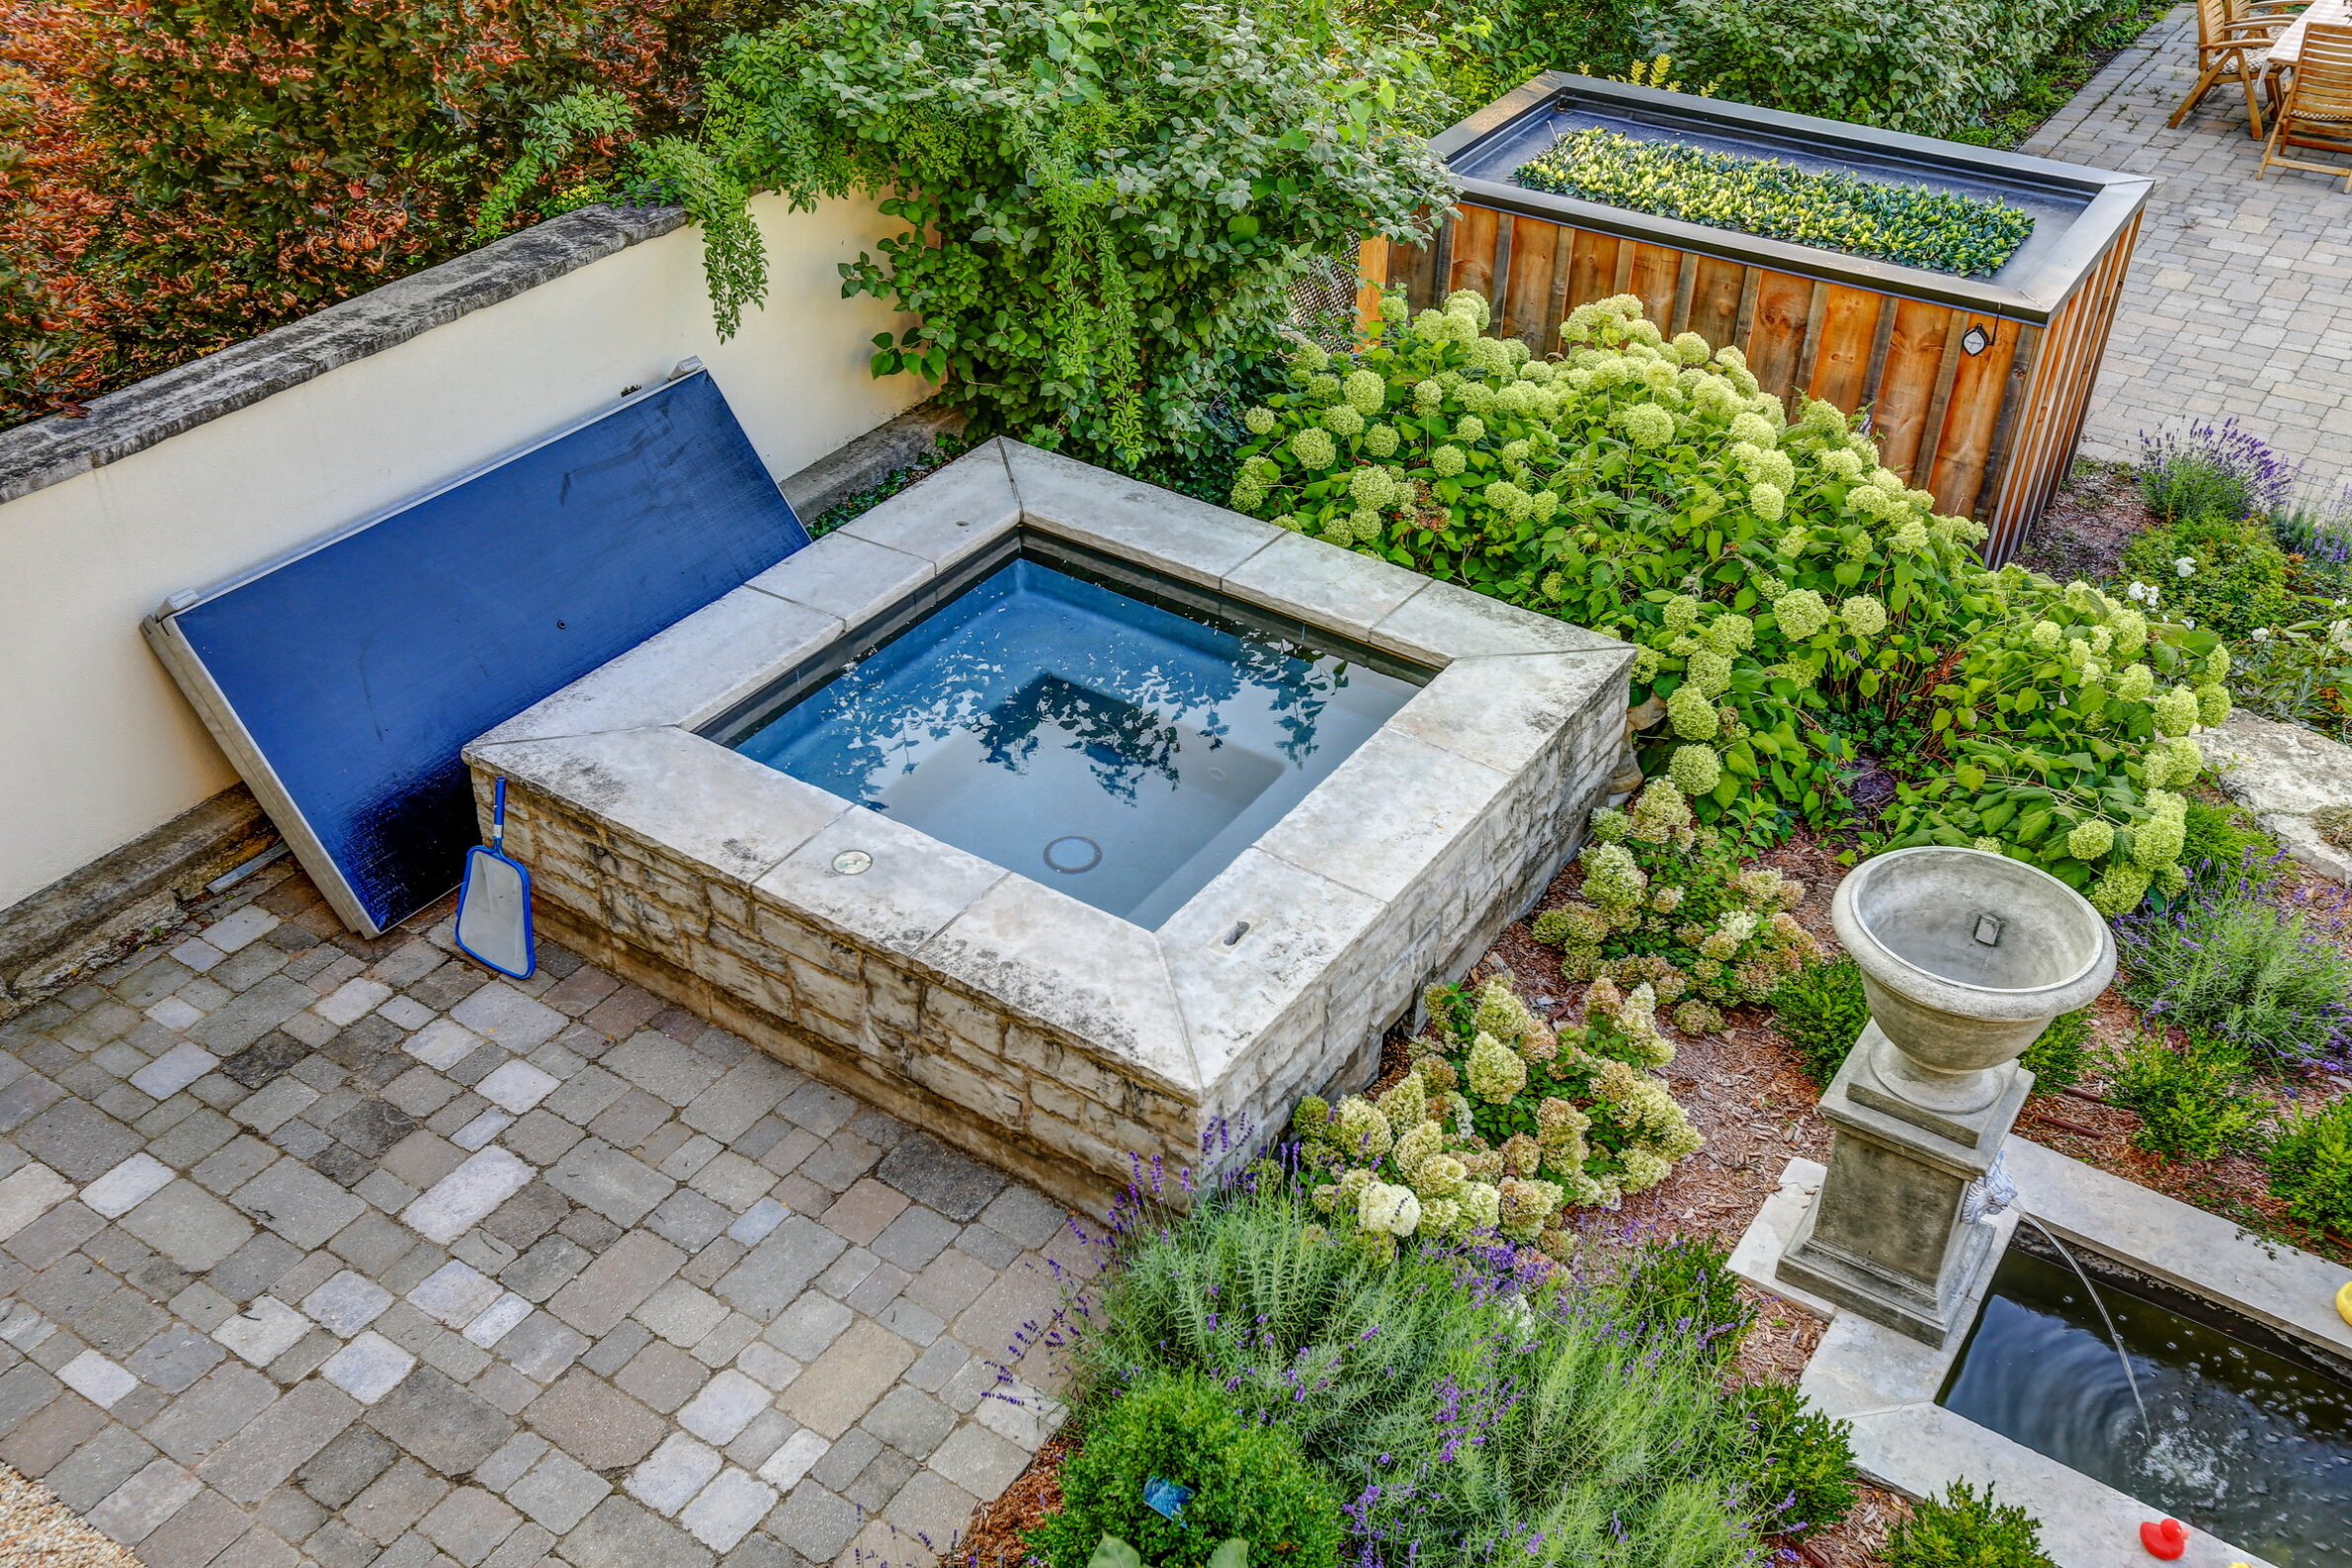 An aerial view of a landscaped garden with a square plunge pool, surrounded by lush greenery, pavers, a wooden raised bed, and a stone fountain.